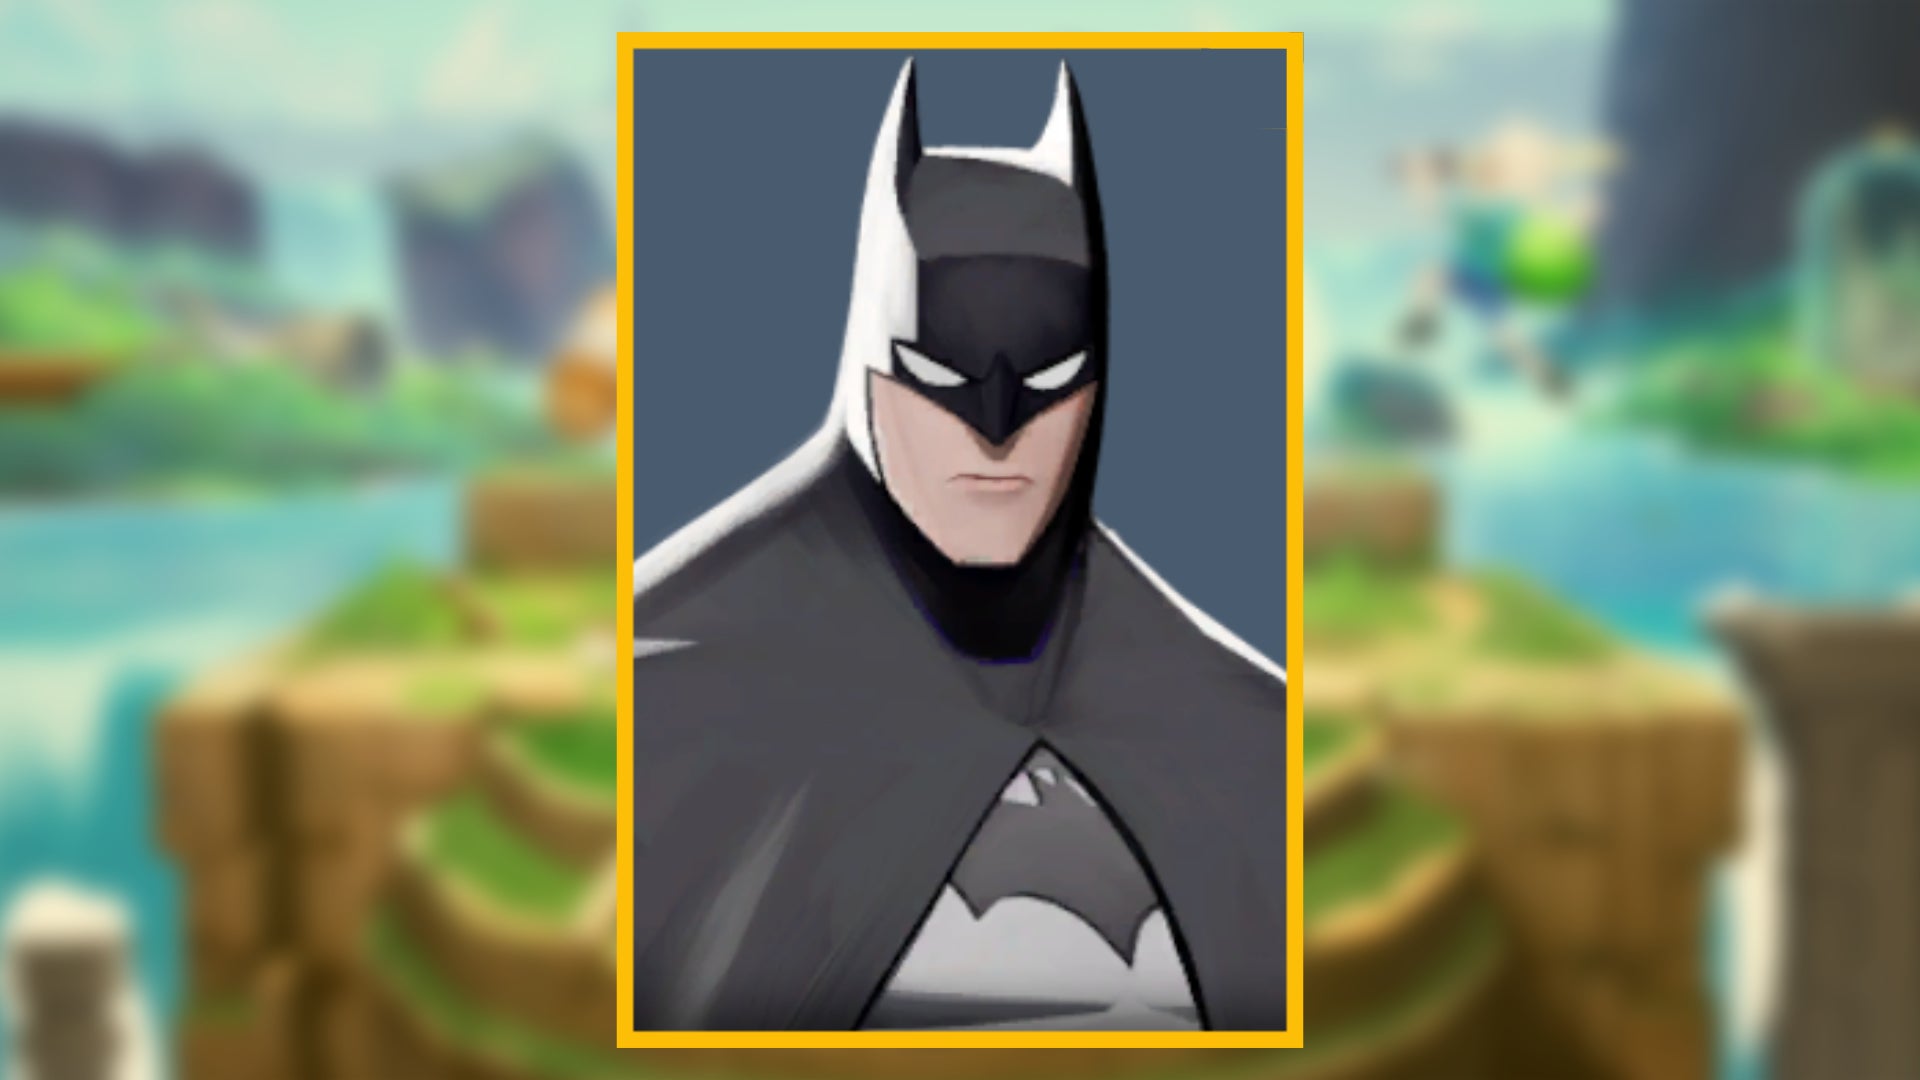 The character portrait of Batman, a playable character in MultiVersus, against a blurred background.